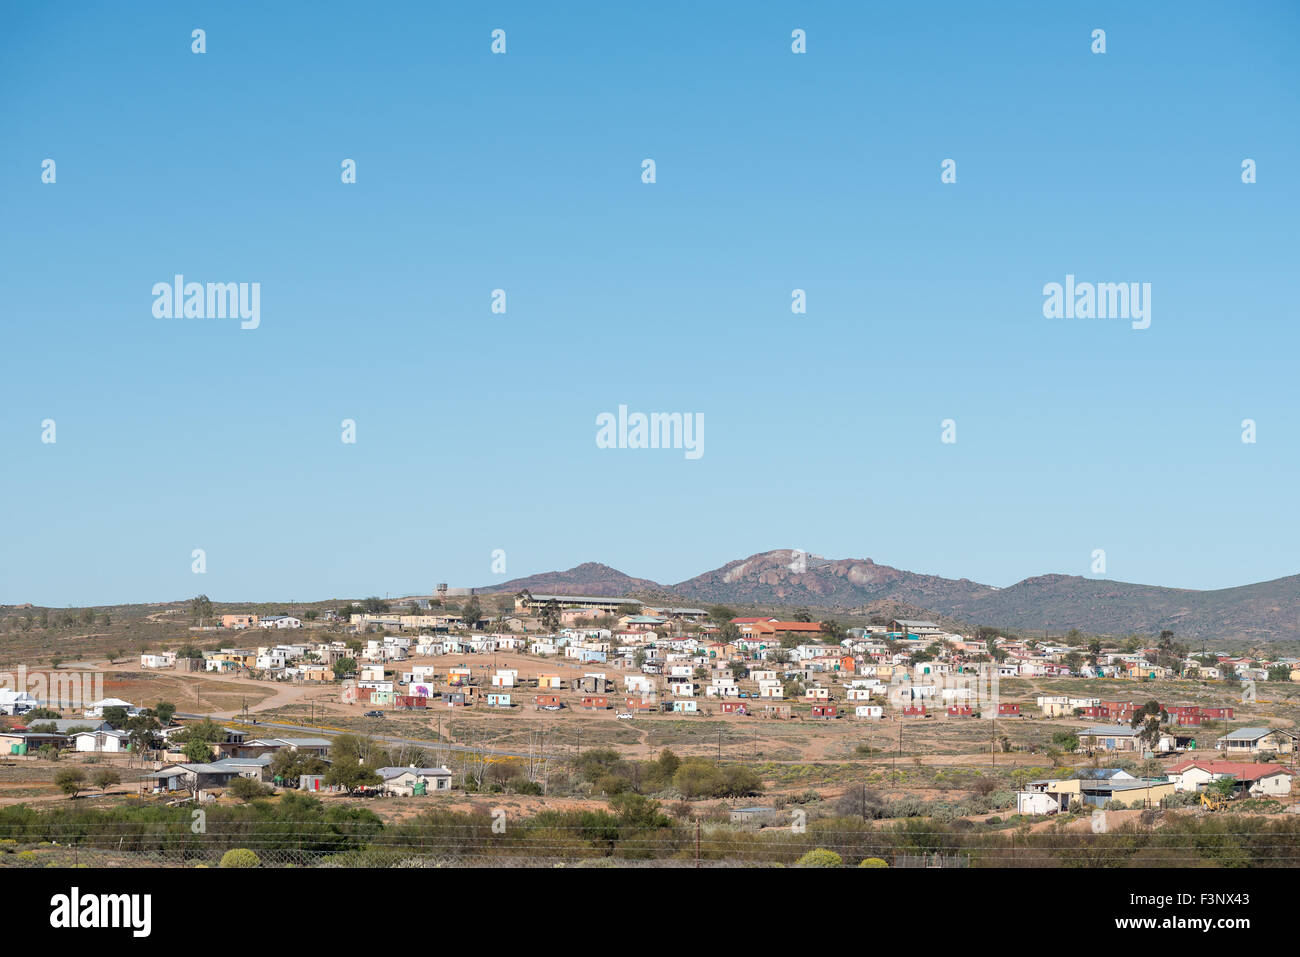 GARIES, SOUTH AFRICA - AUGUST 20, 2015: View of a township in Garies, a small town in the Northern Cape Namaqualand Stock Photo